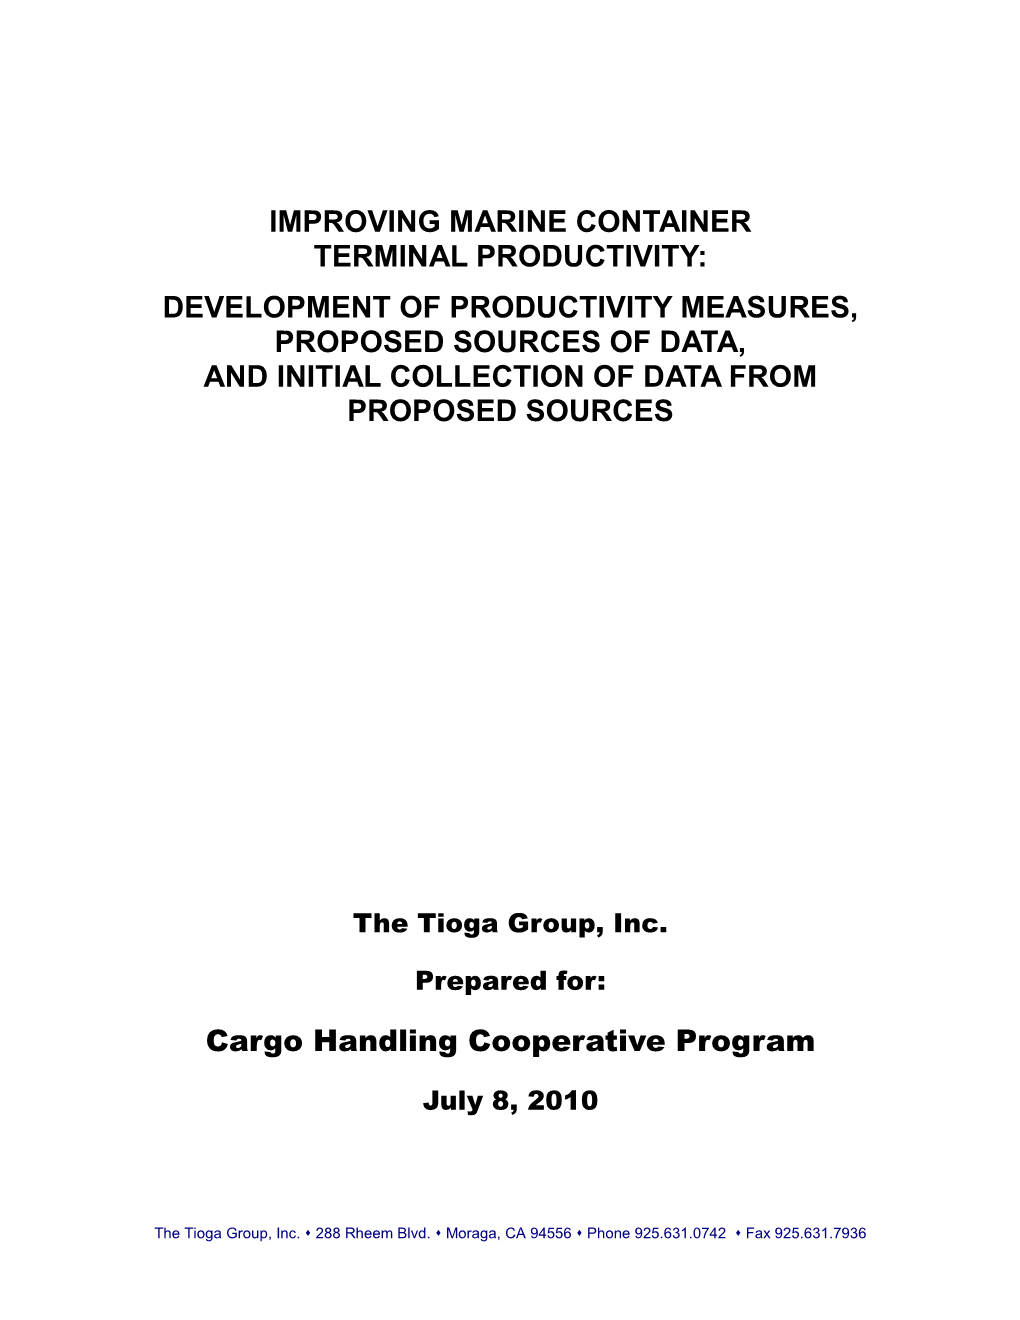 Improving Marine Container Terminal Productivity: Development of Productivity Measures, Proposed Sources of Data, and Initial Collection of Data from Proposed Sources